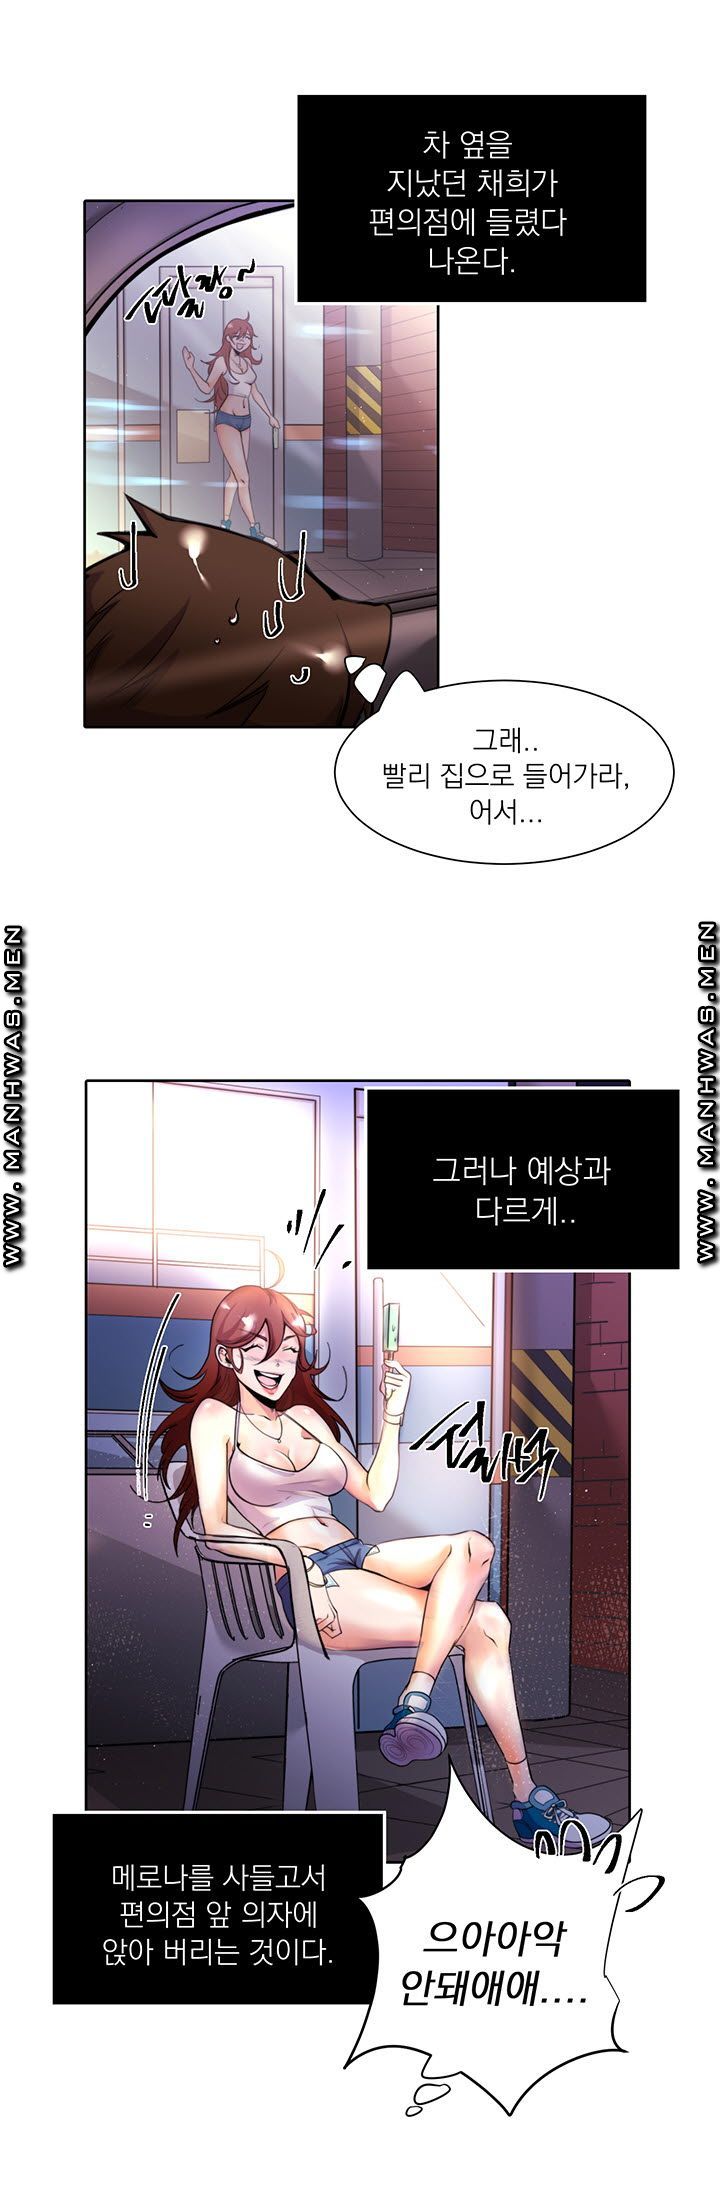 Empty Place Raw - Chapter 10 Page 2